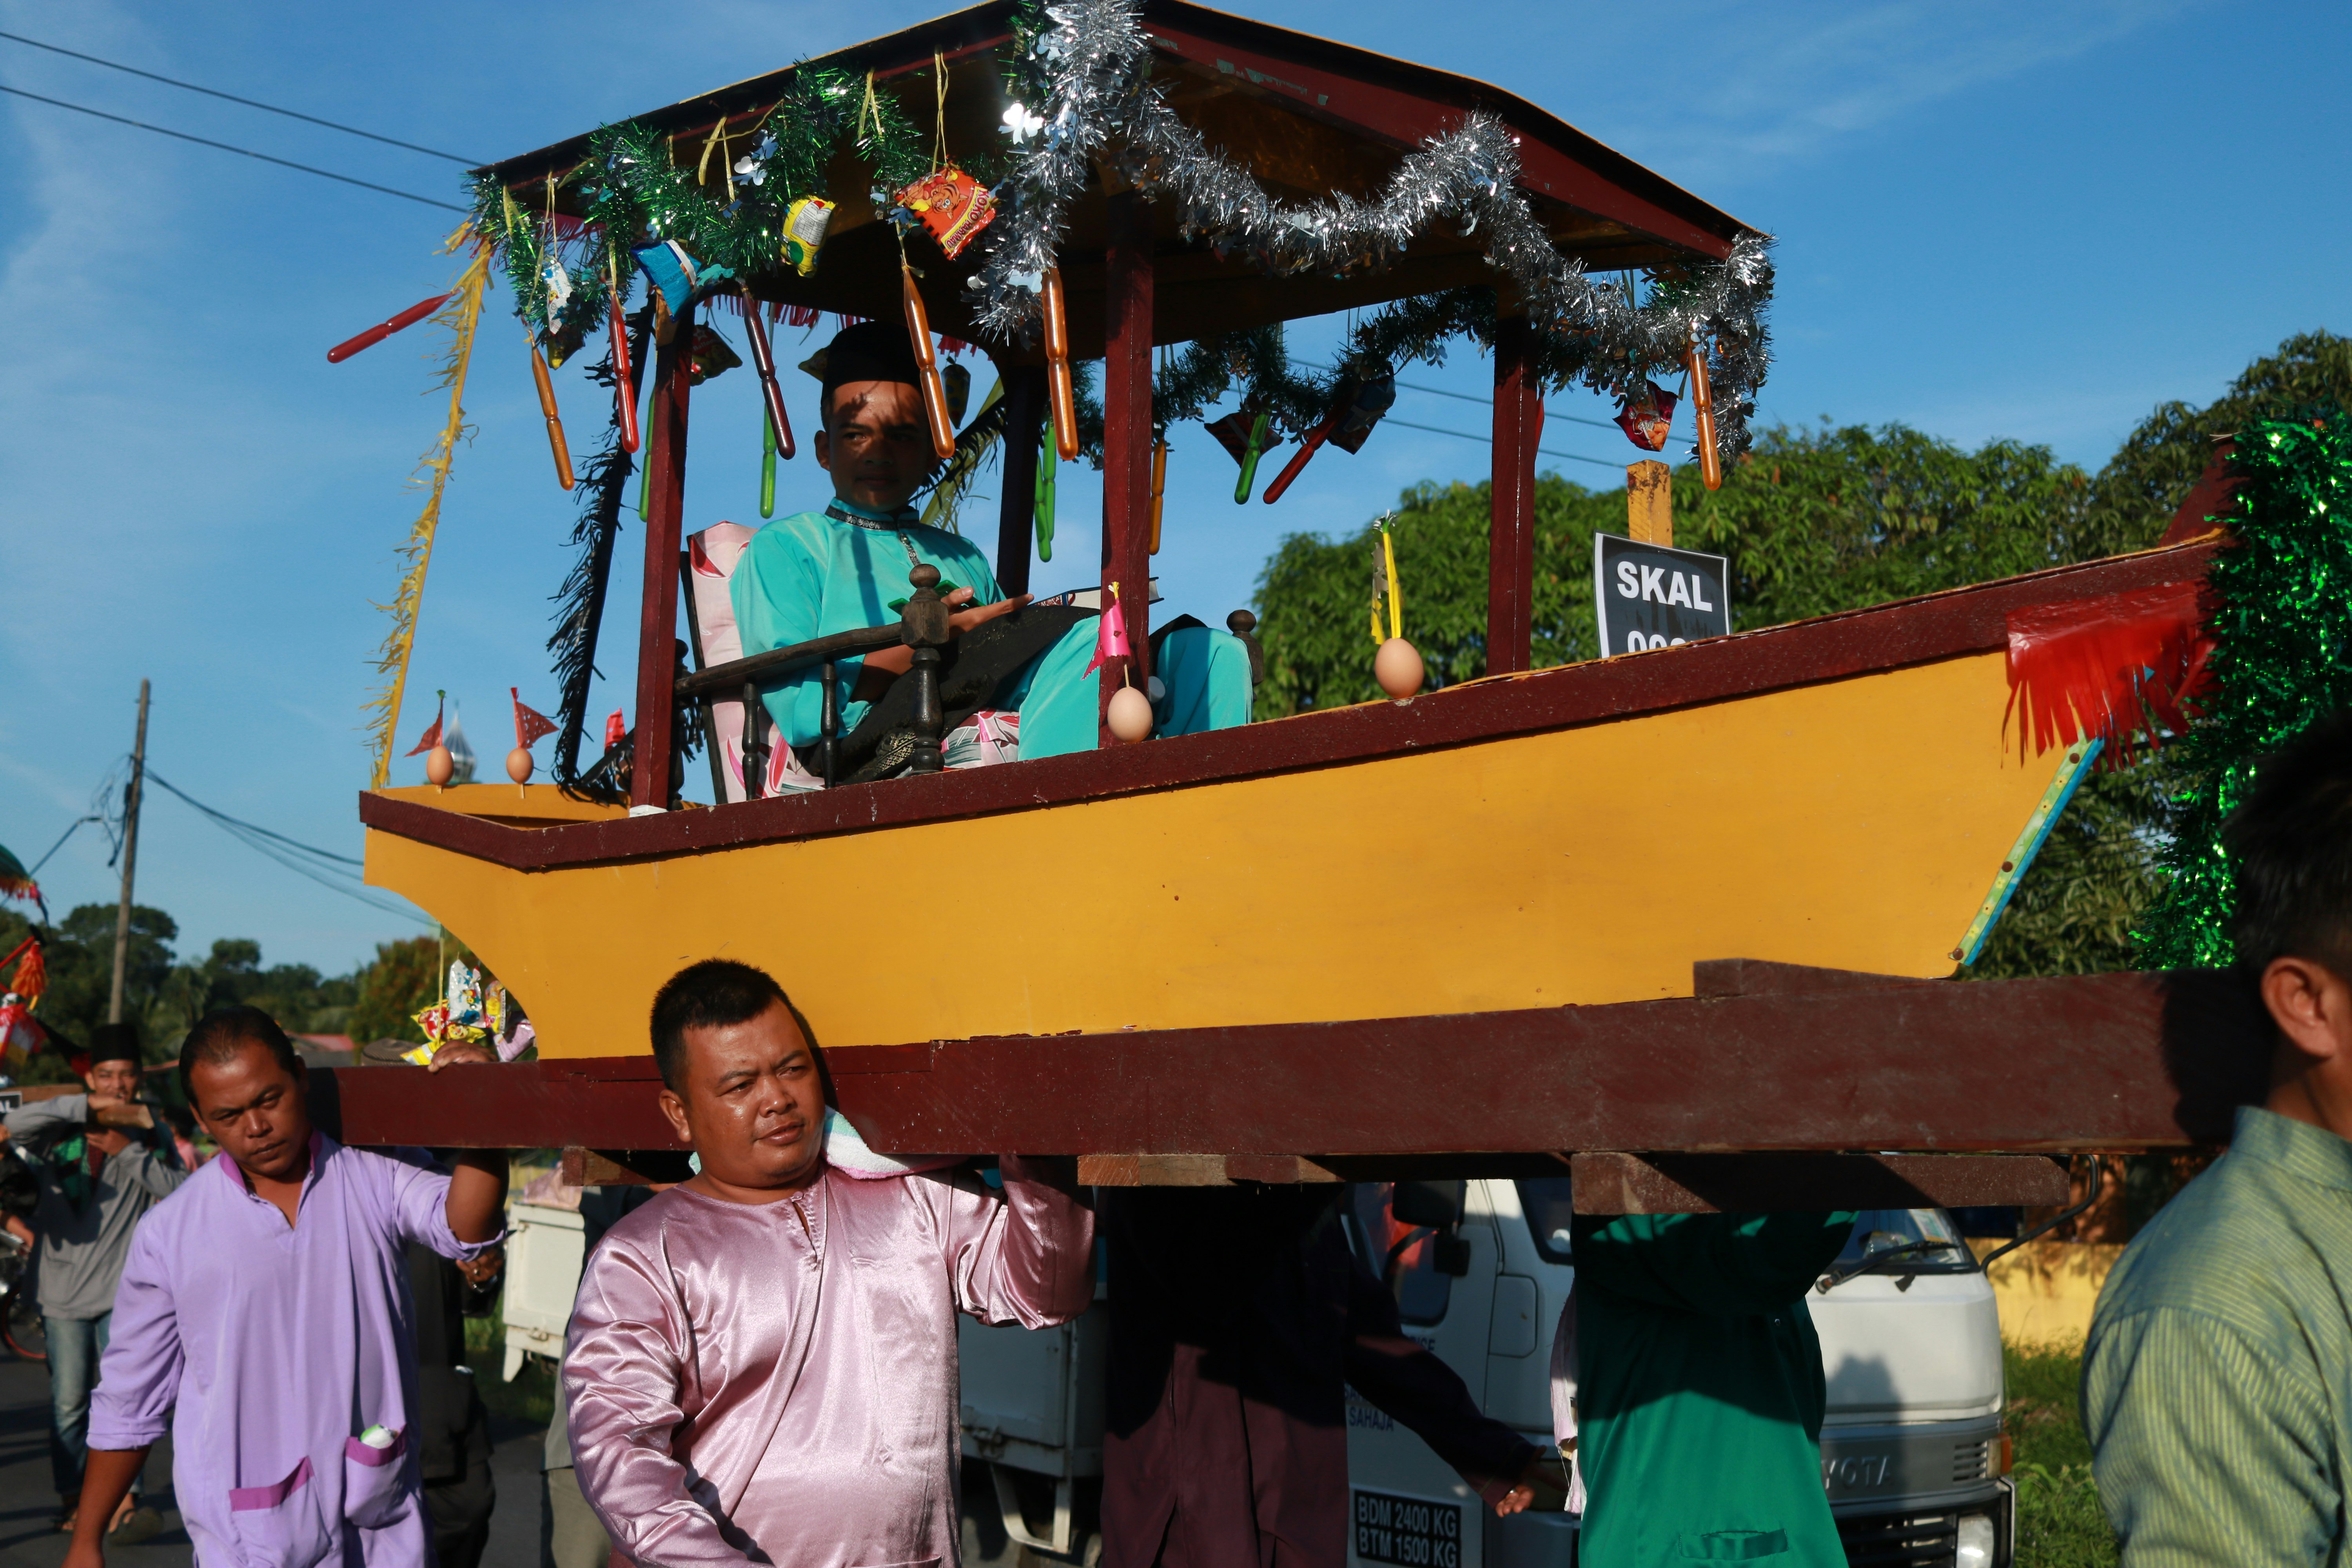 Men carrying a yellow boat replica decoated with silver tinsel. In the boat is a man seated and dressed in green.